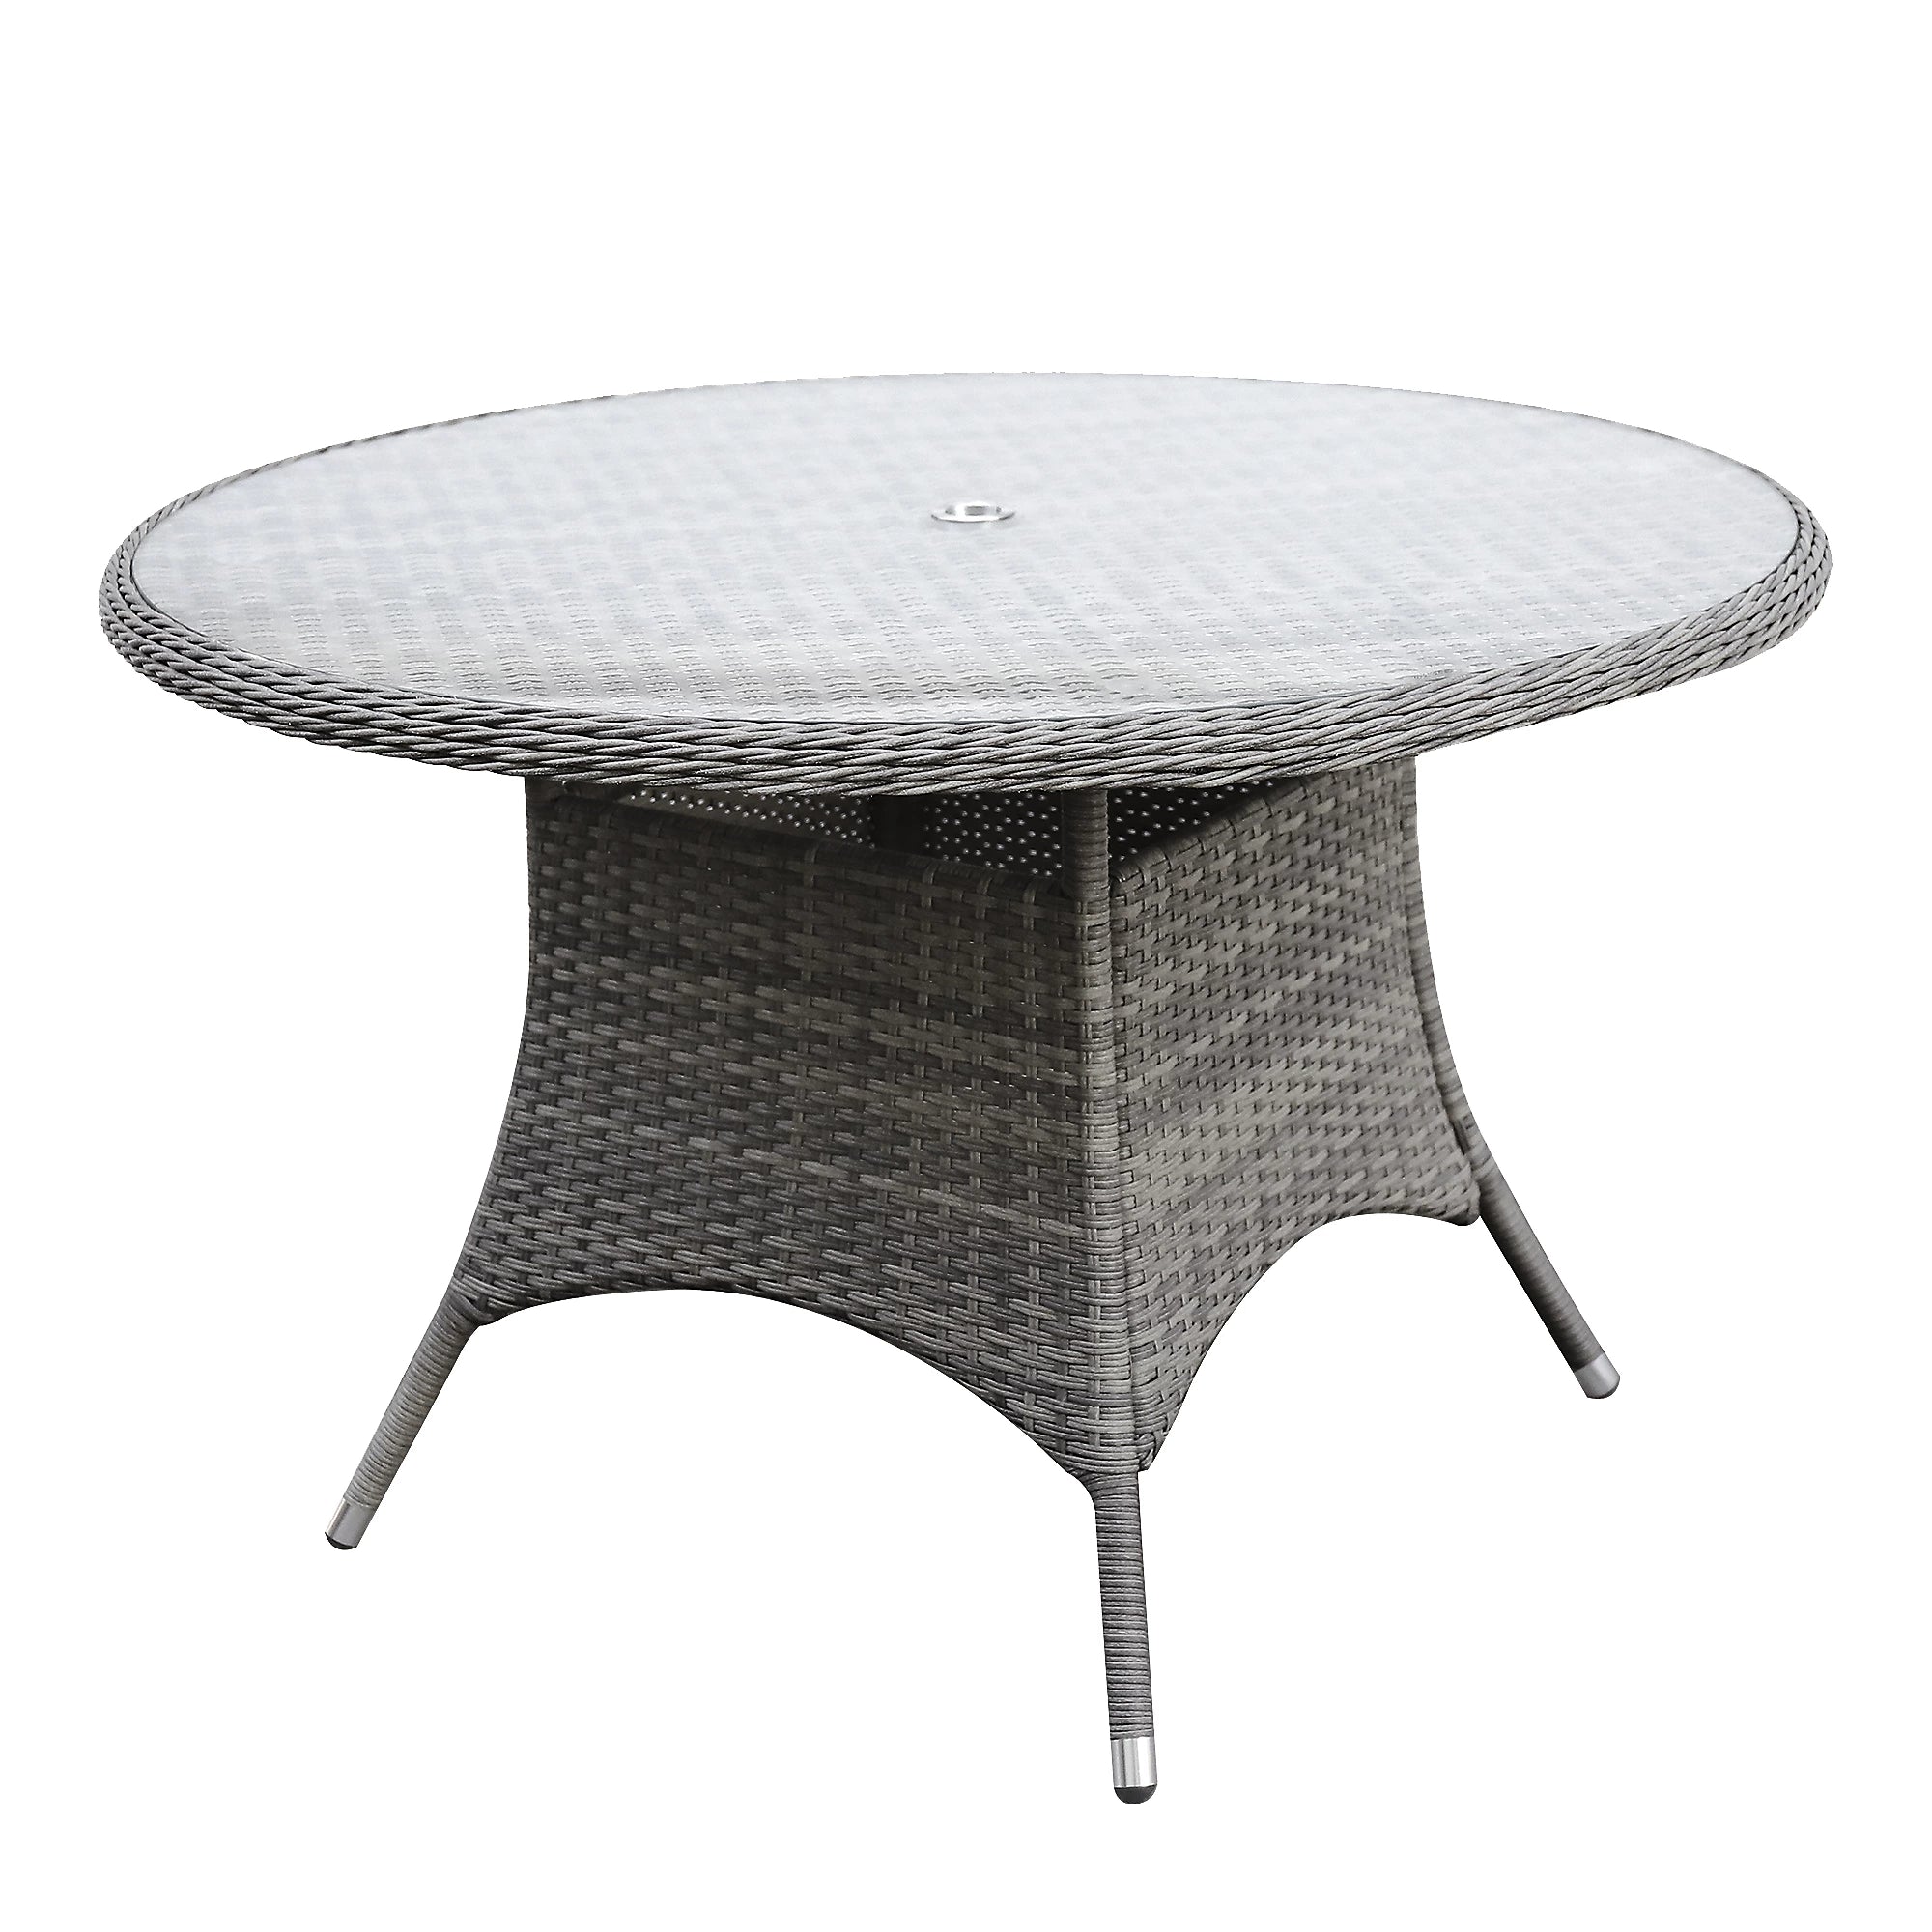 GoodHome Hamilton Rattan effect 4 seater Fixed Dining table, Rattan Garden Table 0987